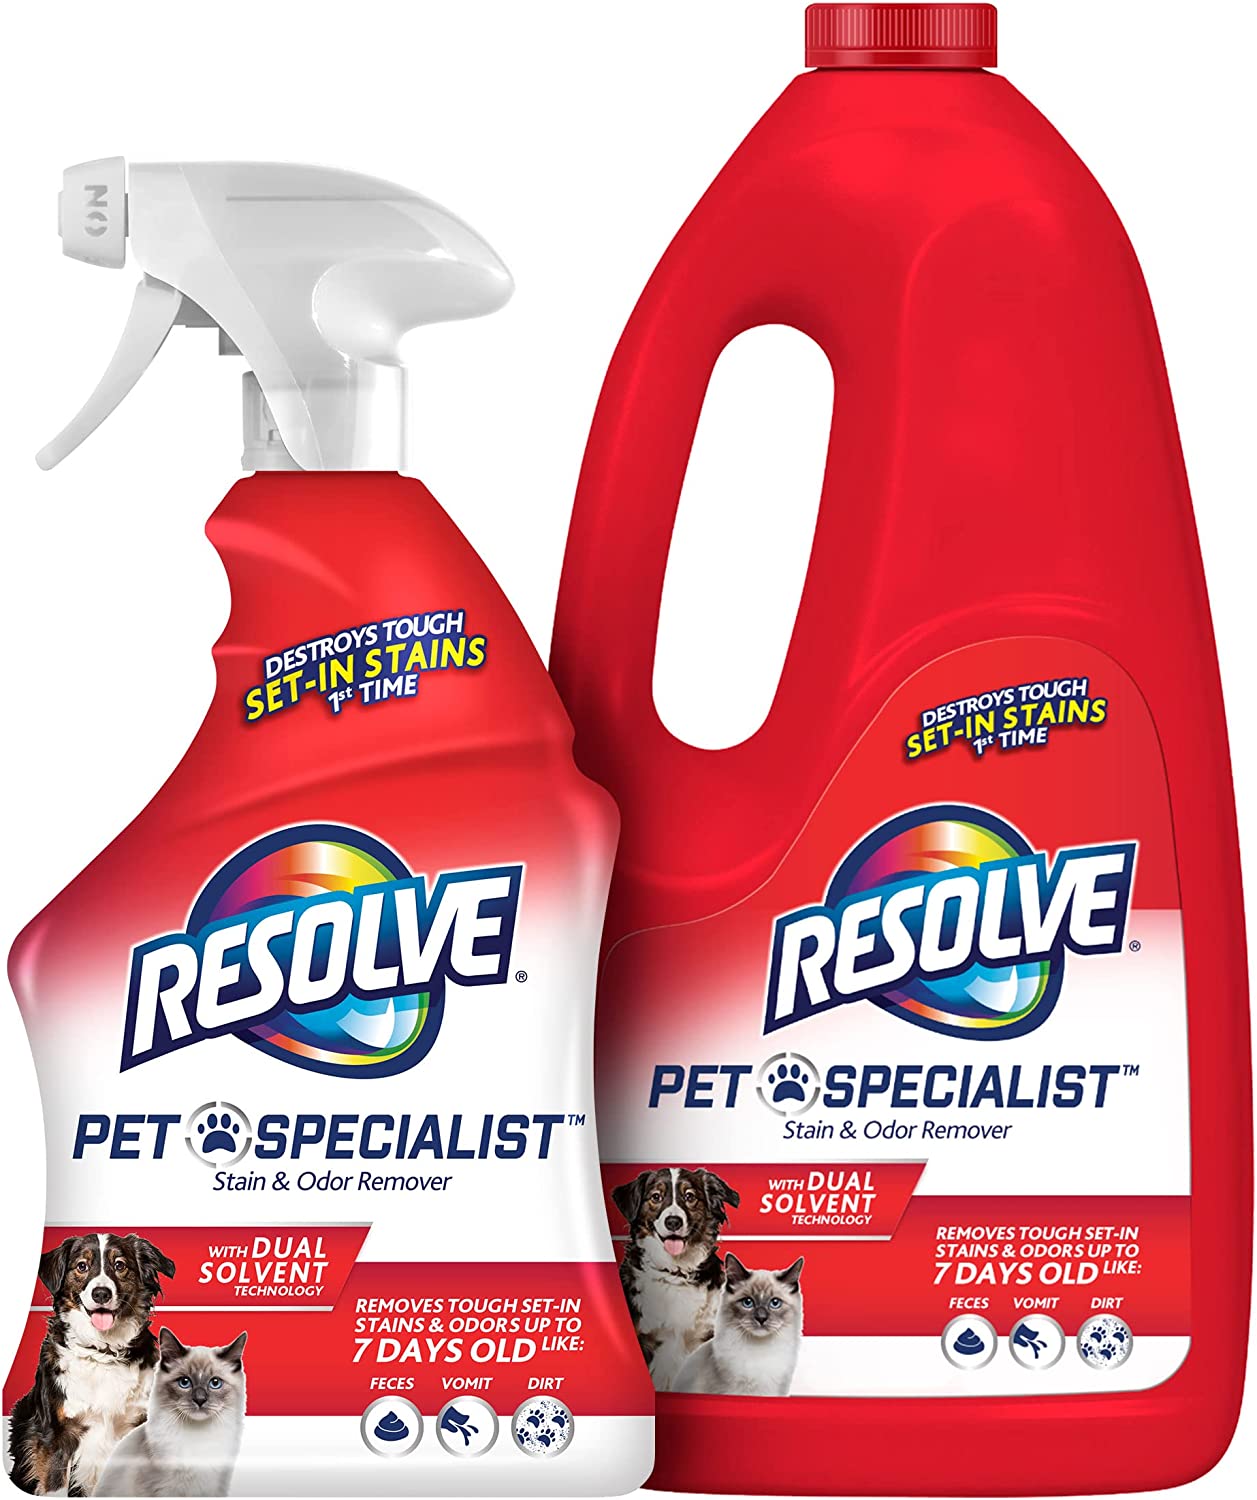 Resolve Pet Specialist Carpet Cleaner, Stain Remover [...]